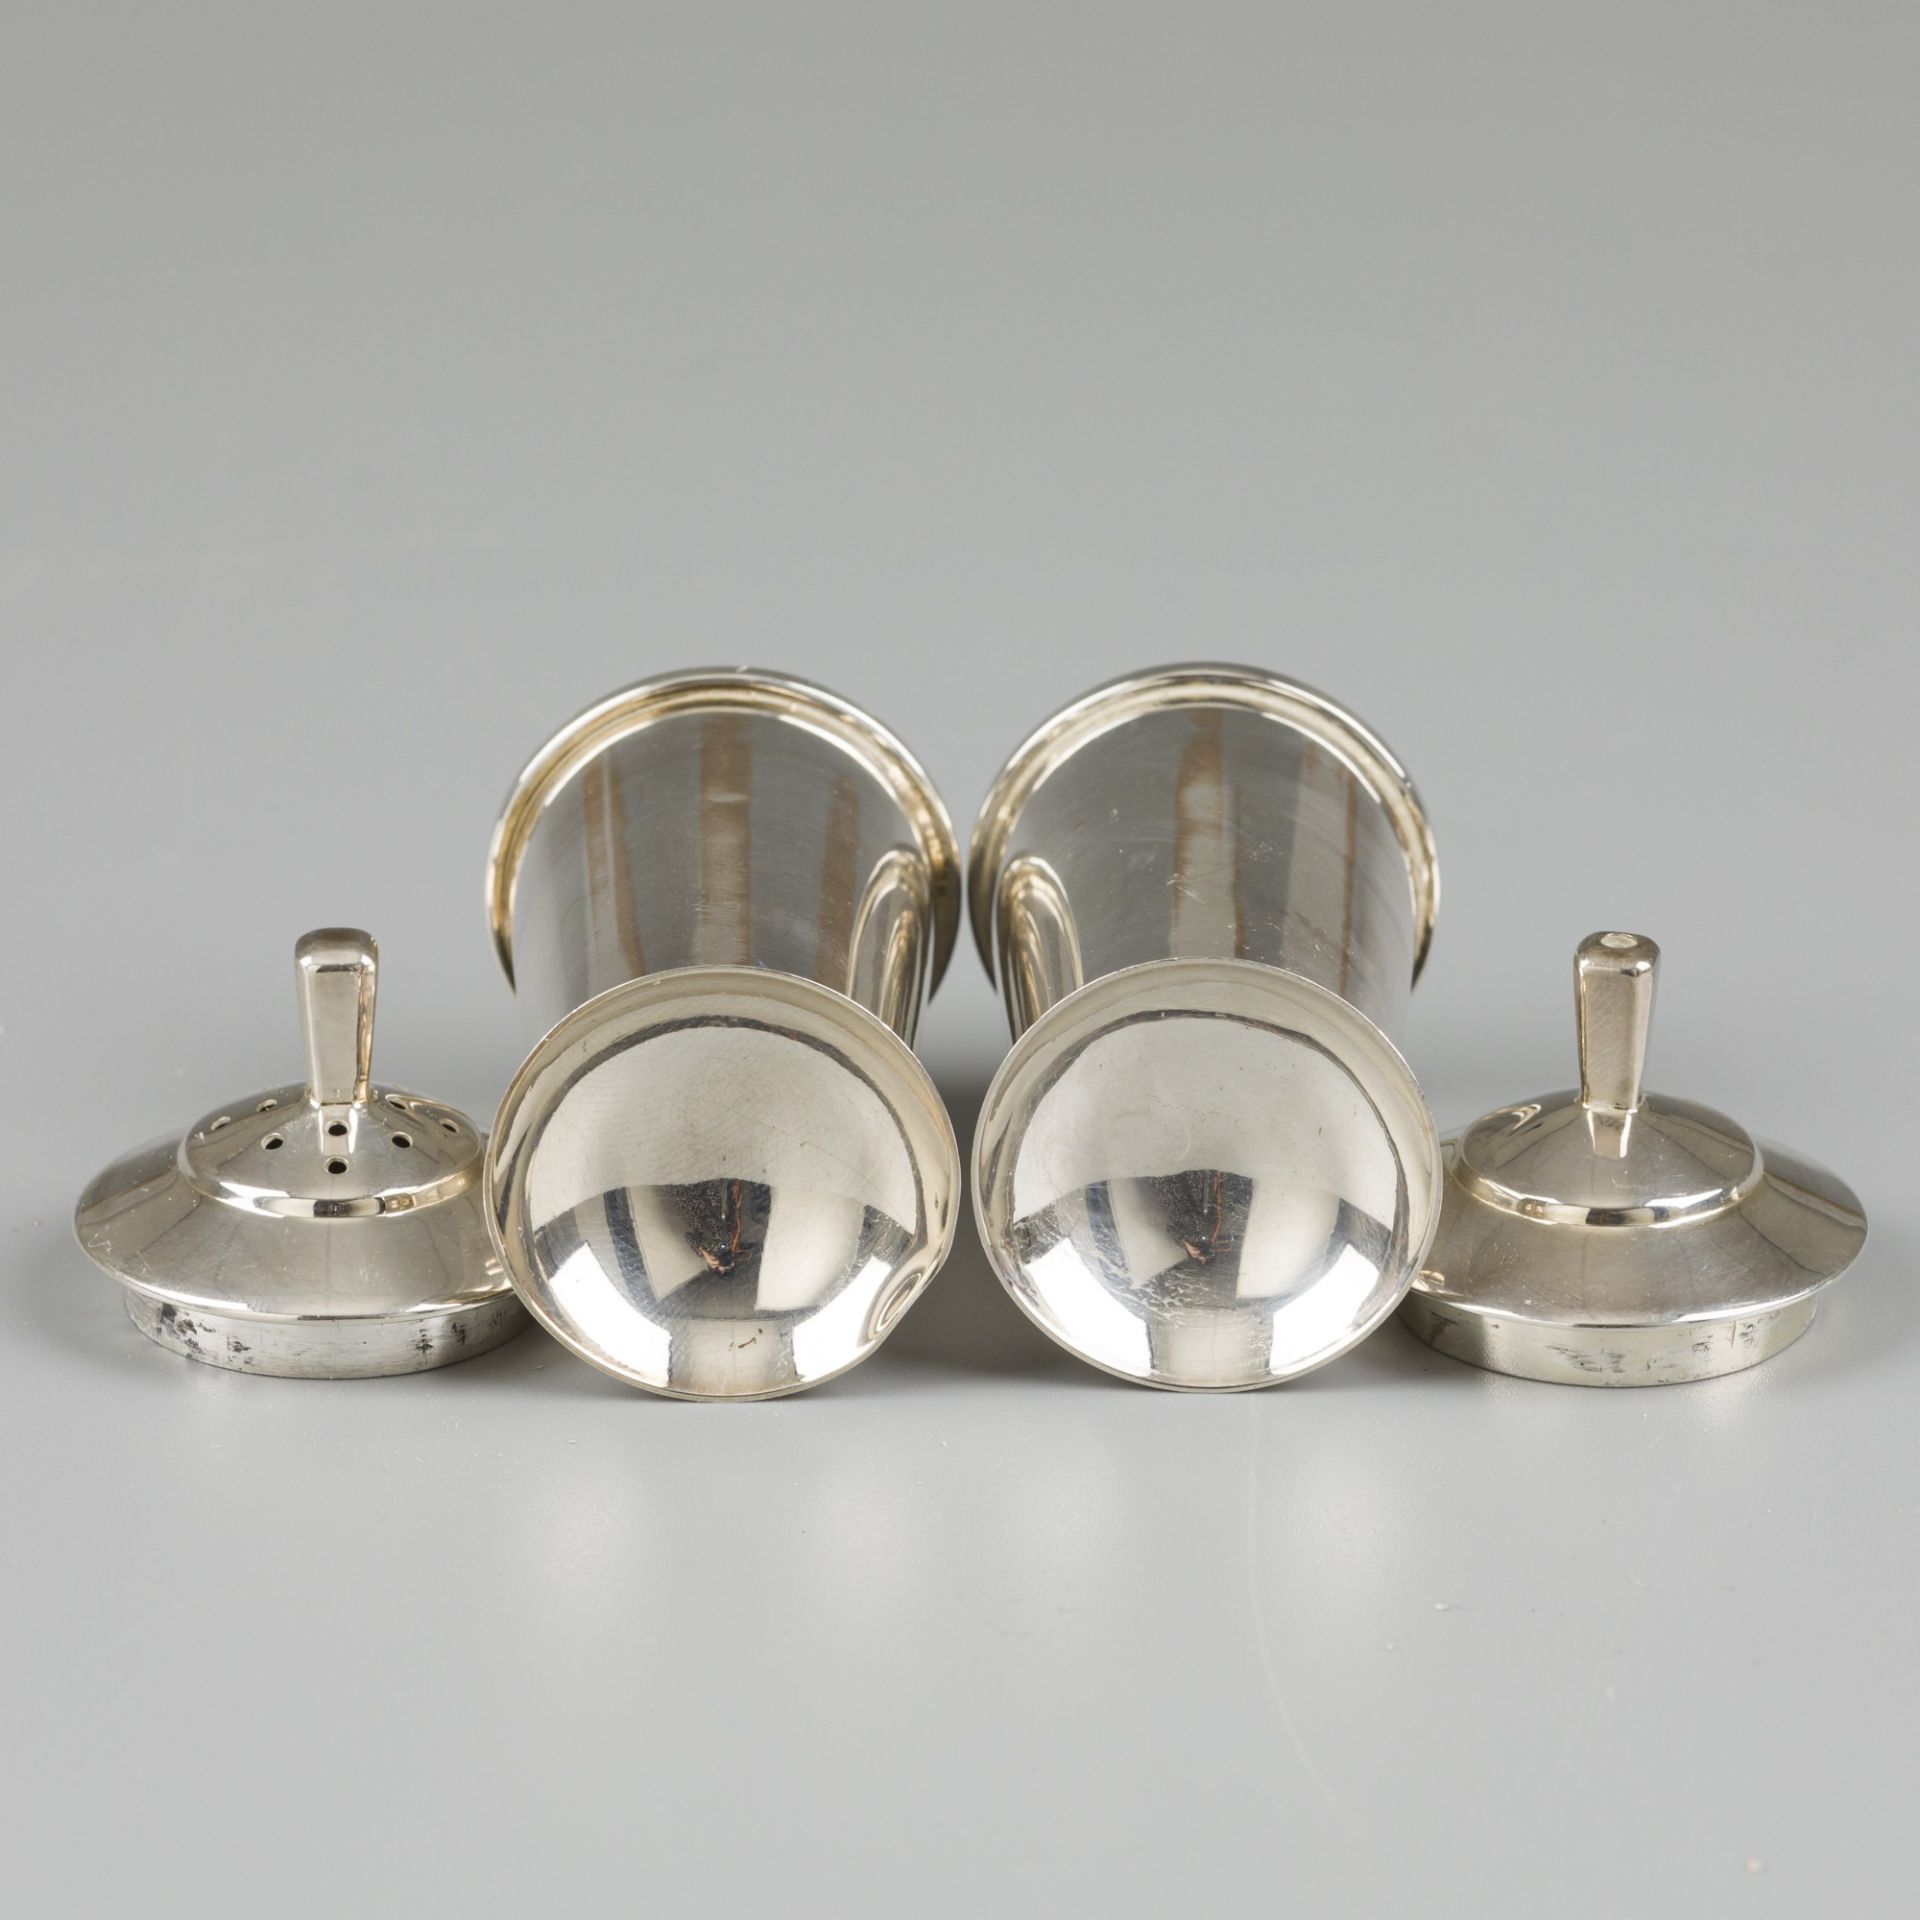 Pepper and salt shakers, silver. - Image 2 of 5